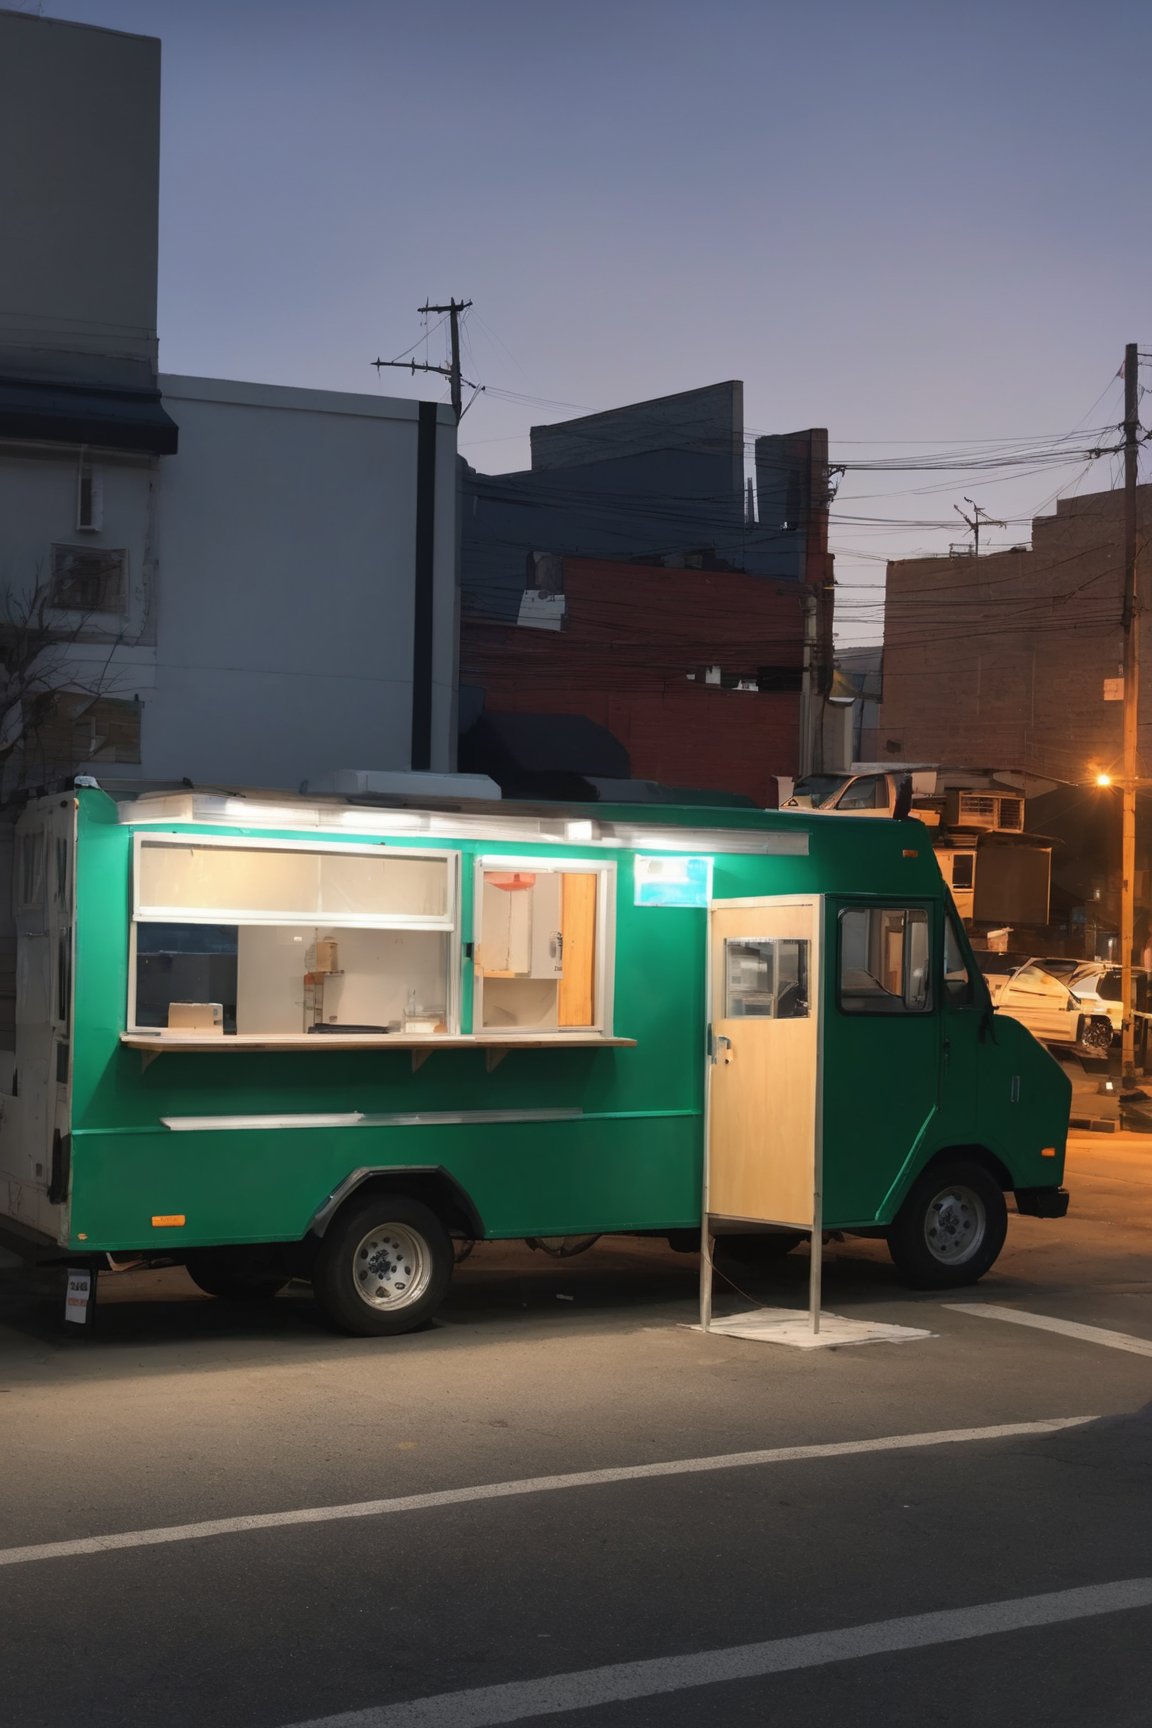 eatery looking food truck stopped by a pole in an empty lot at night